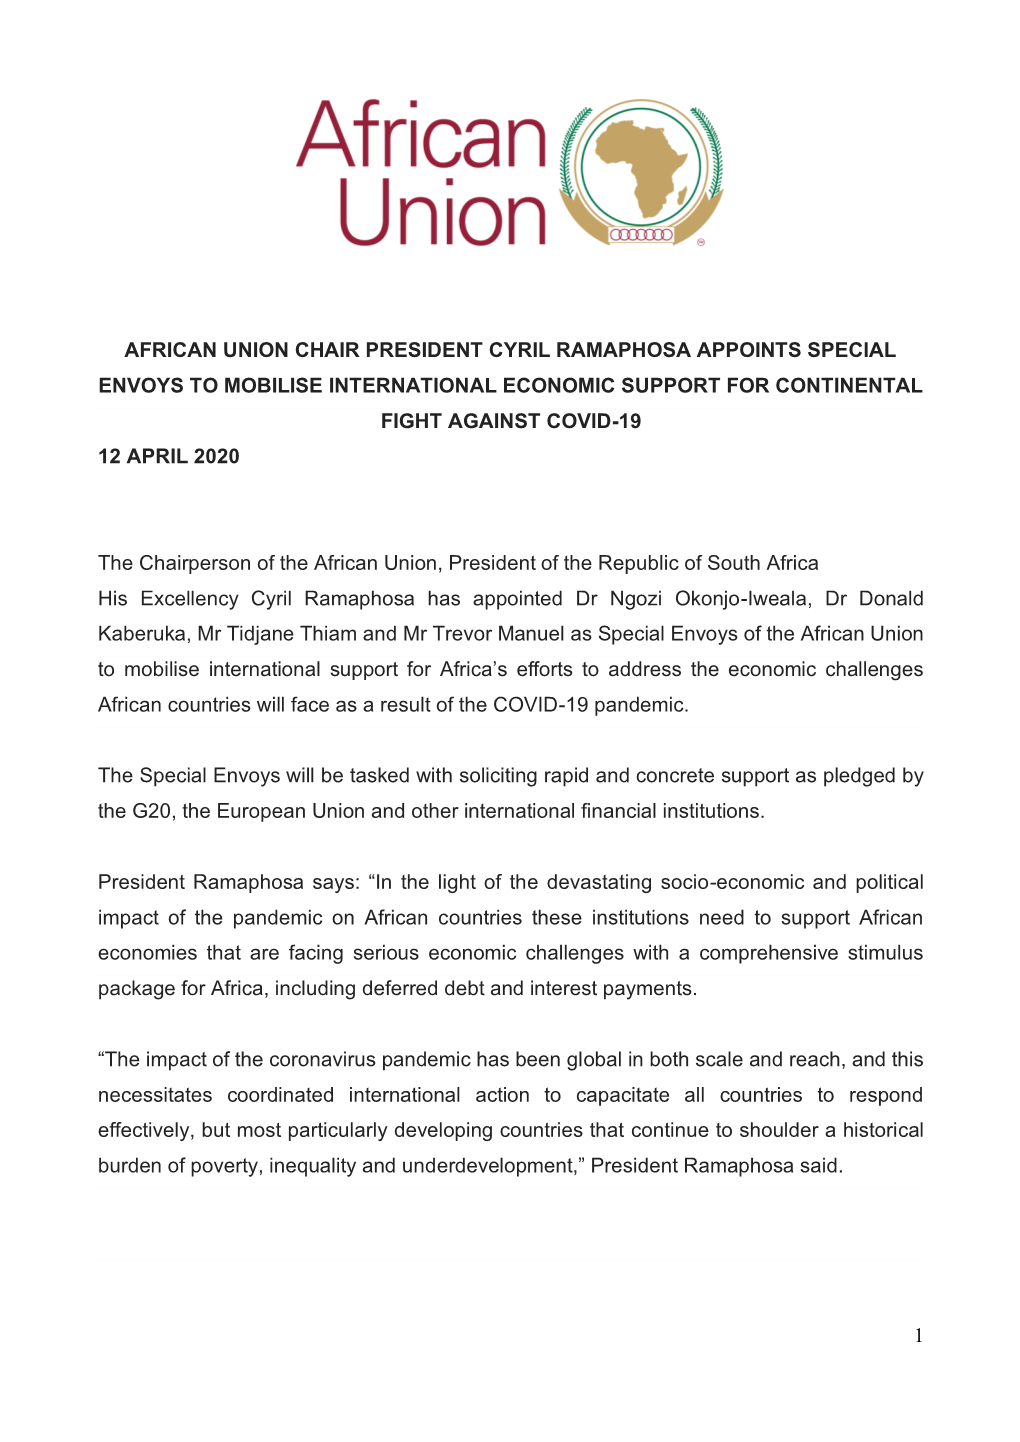 1 African Union Chair President Cyril Ramaphosa Appoints Special Envoys to Mobilise International Economic Support for Continen